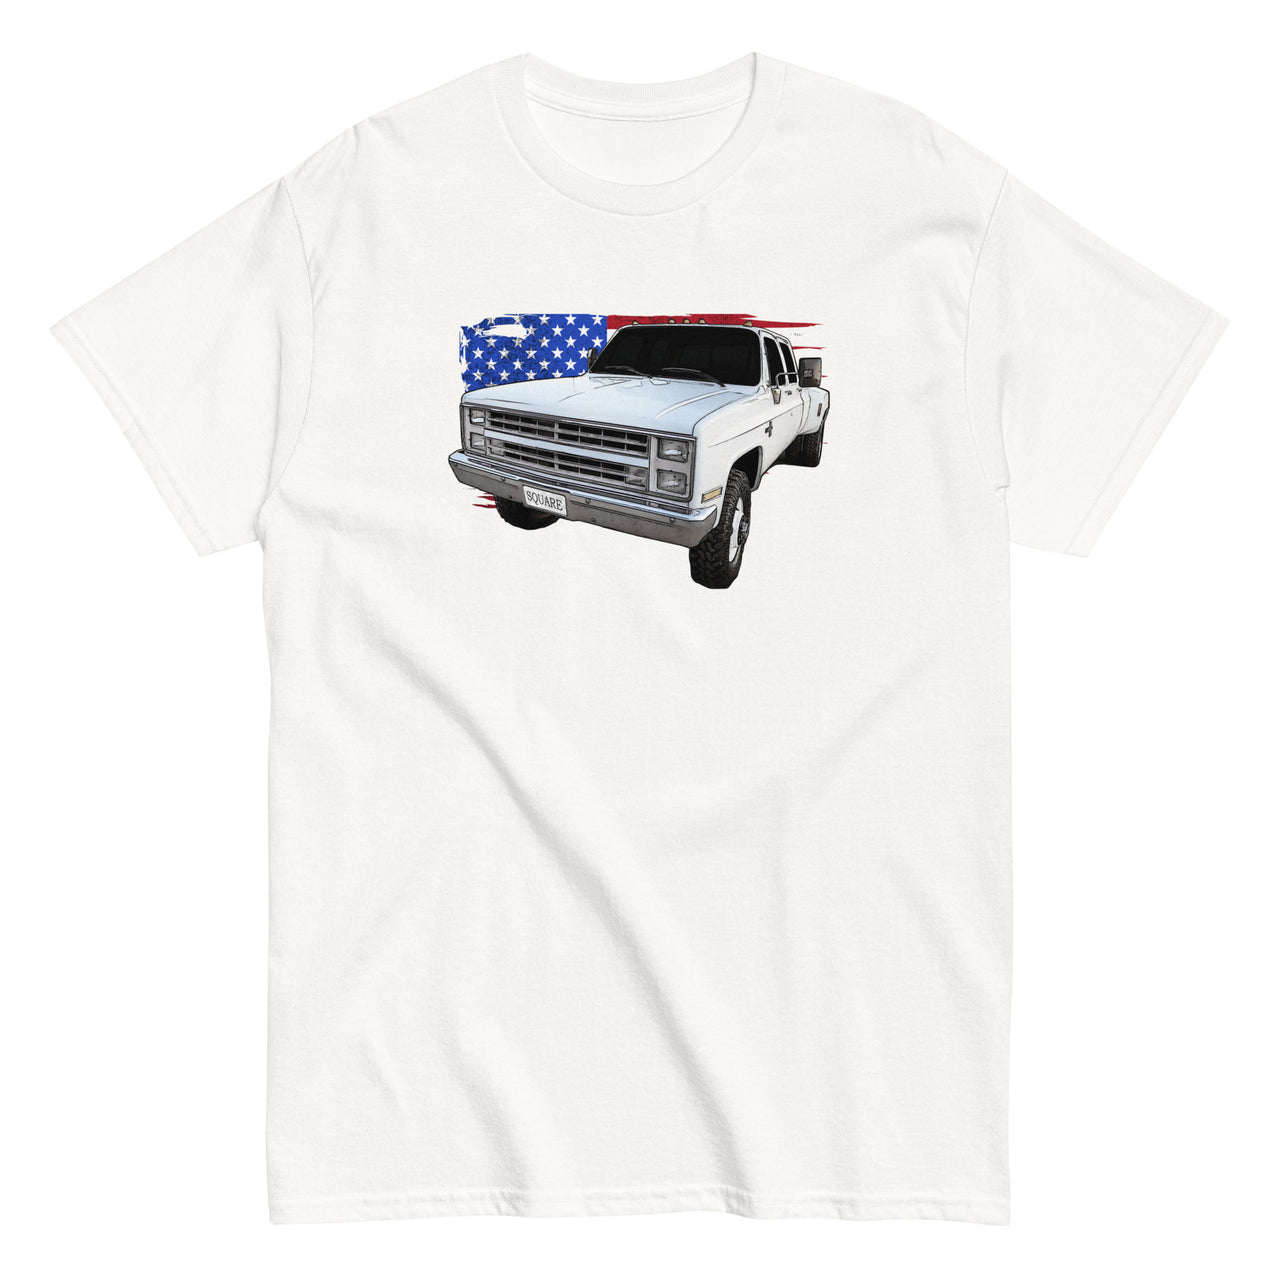 Square Body Dually Crew Cab T-Shirt in white